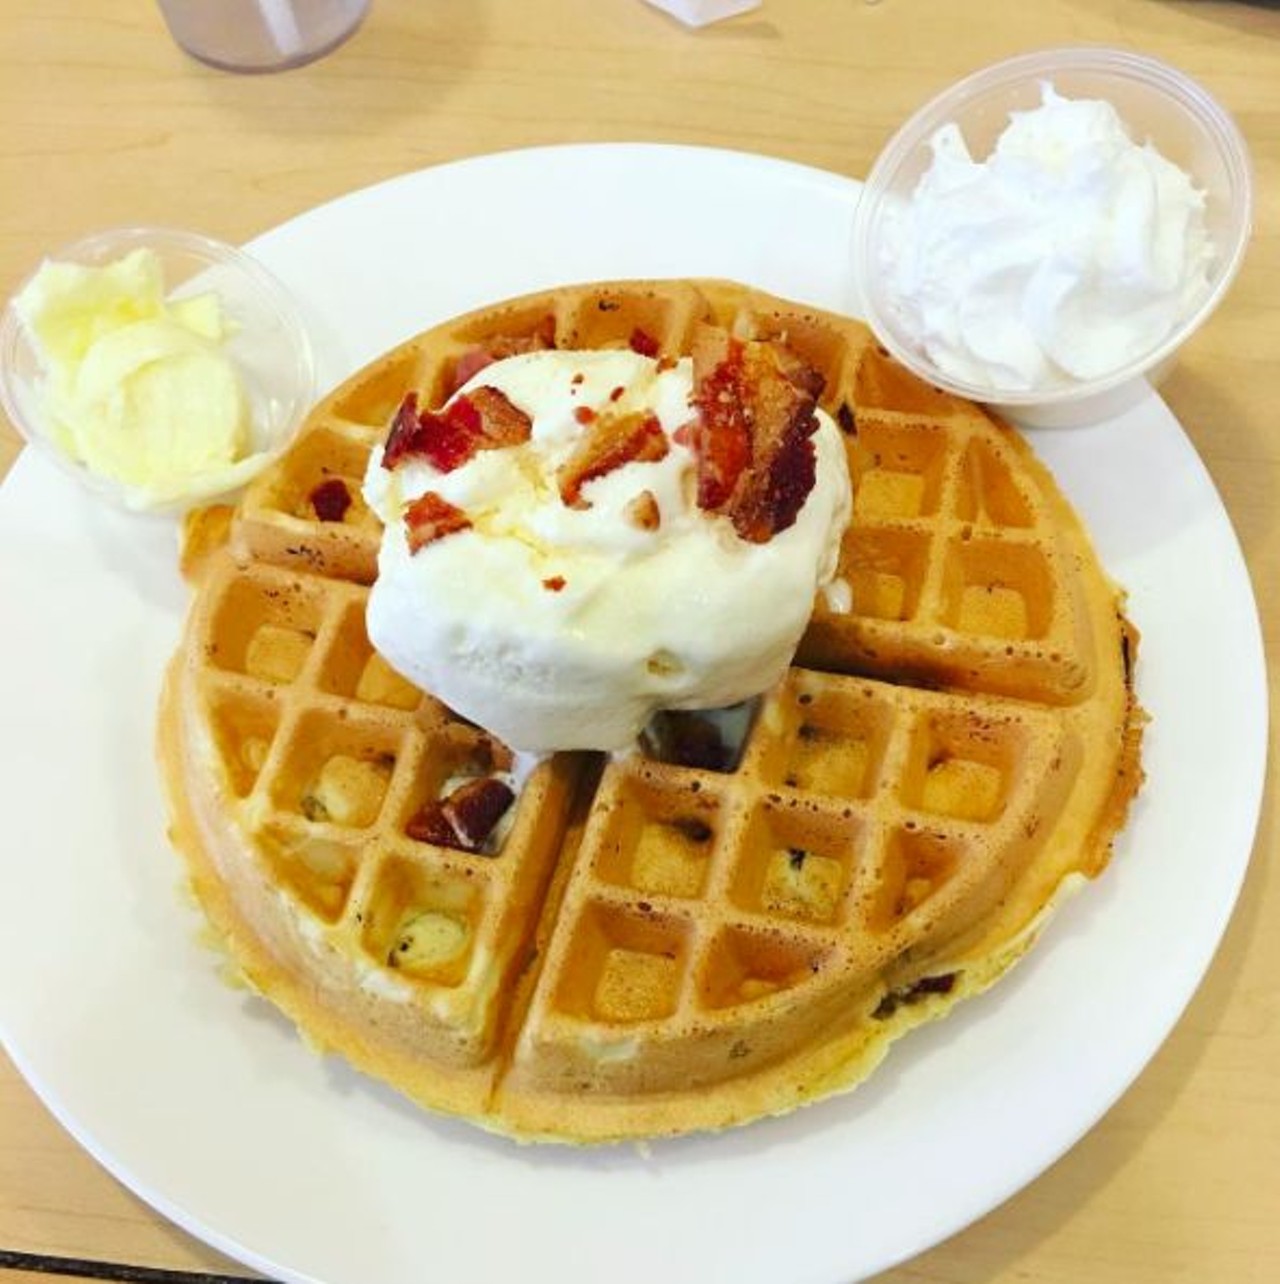 The Pantry&nbsp;
34220 Van Dyke, Sterling Heights
This local favorite is sure to satisfy all your omelette or pancake cravings. Opt for both, because, why not? Not to mention they have a daily special of all-you-can -eat pancakes for around 7 bucks, so that&#146;s pretty much heaven.
Photo via IG user @deliahohen&nbsp;